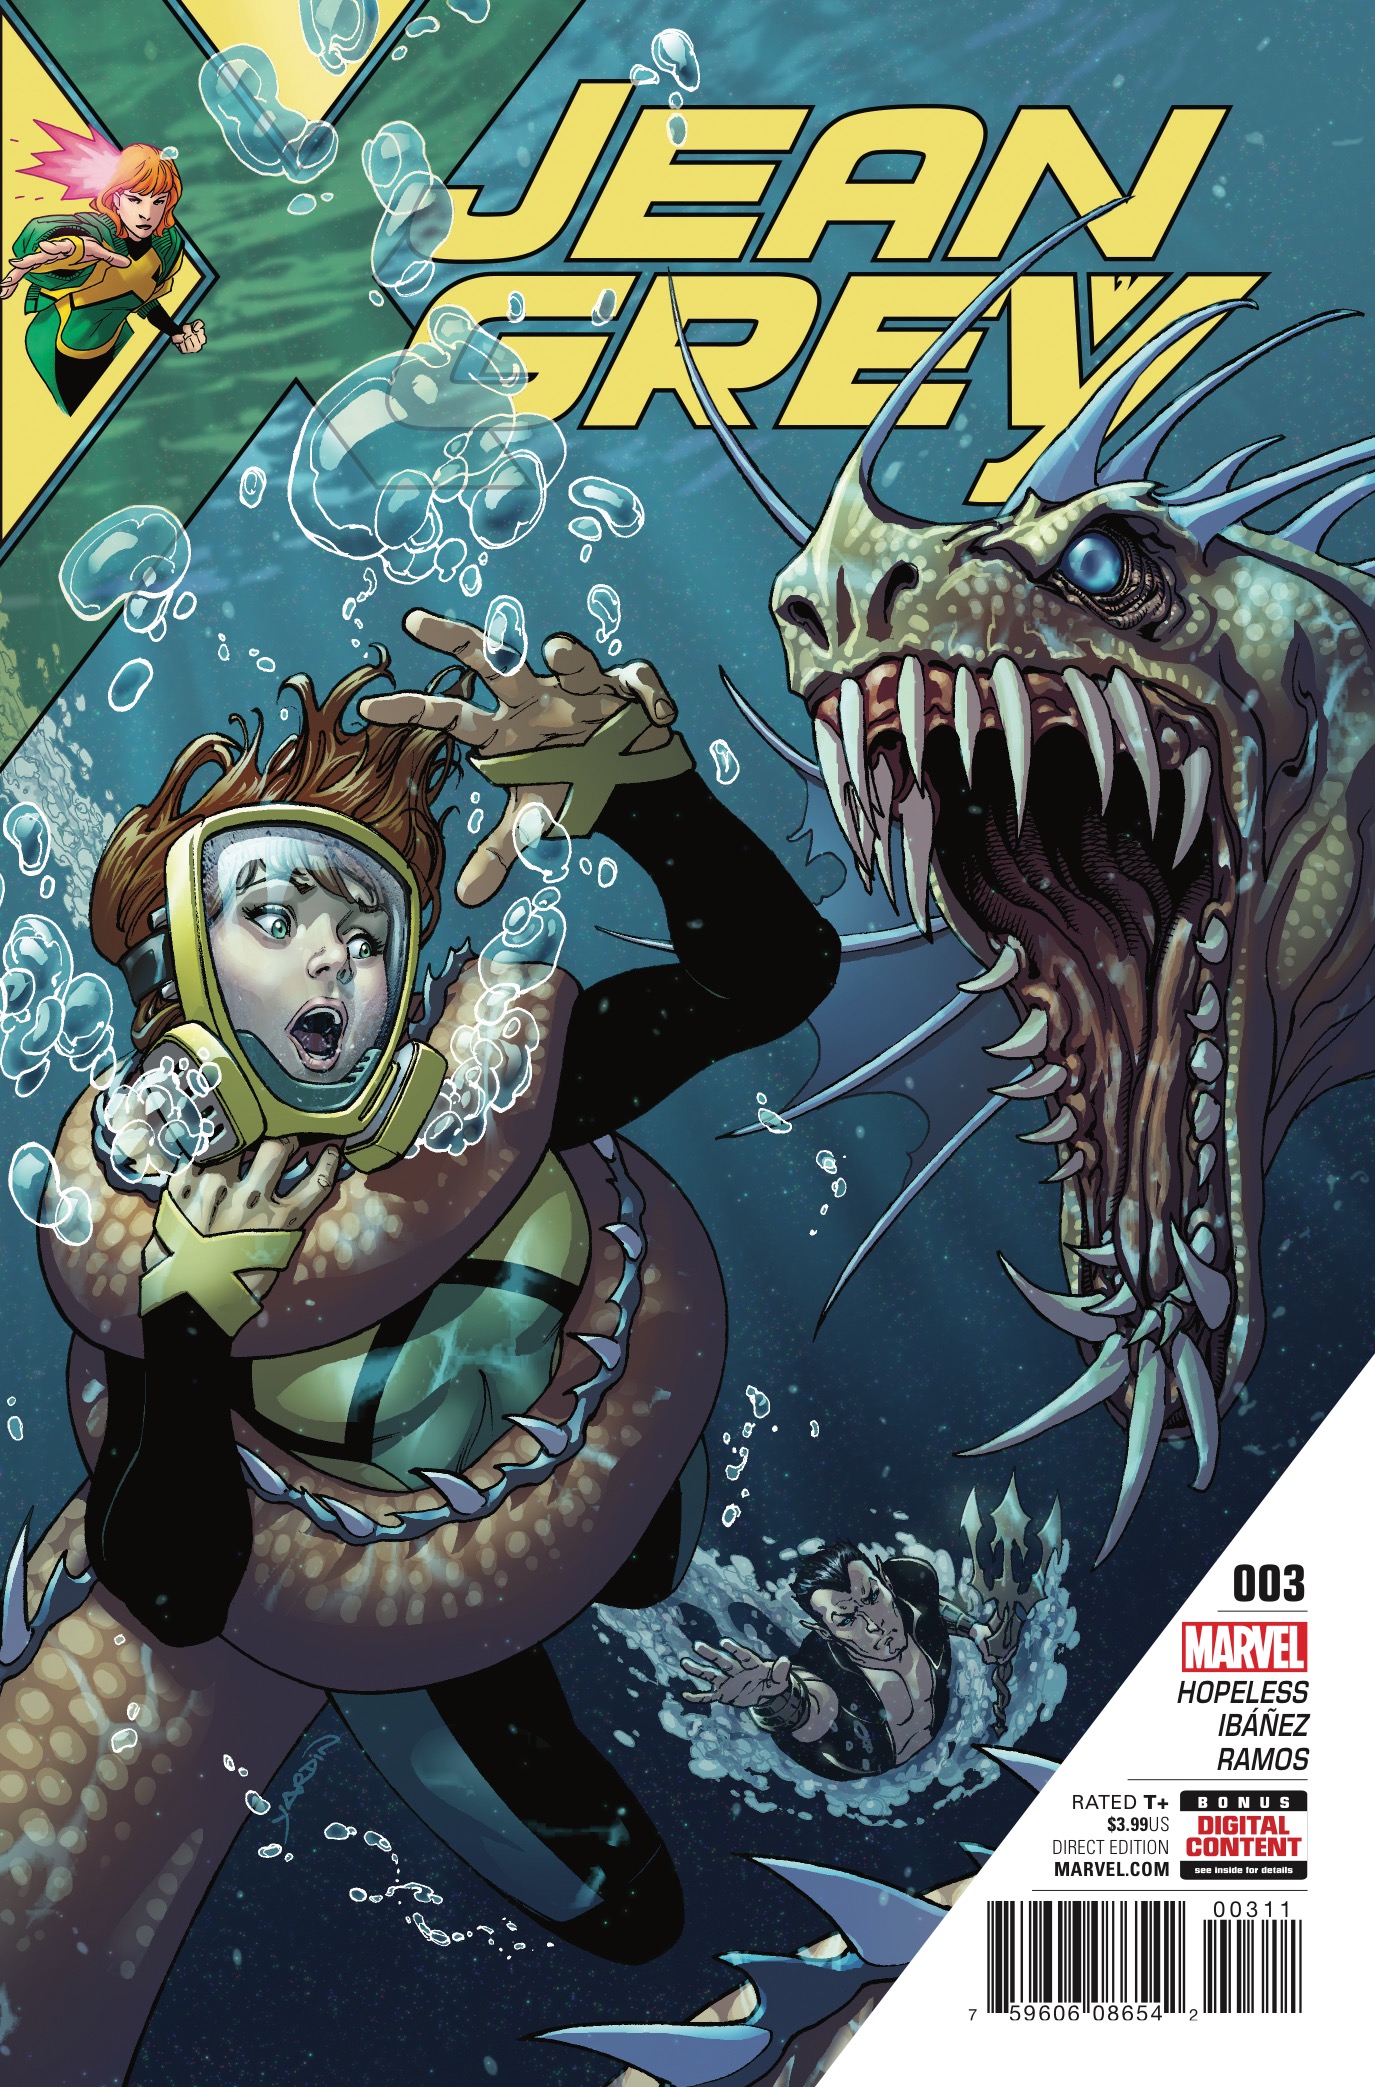 Jean Grey #3 Review